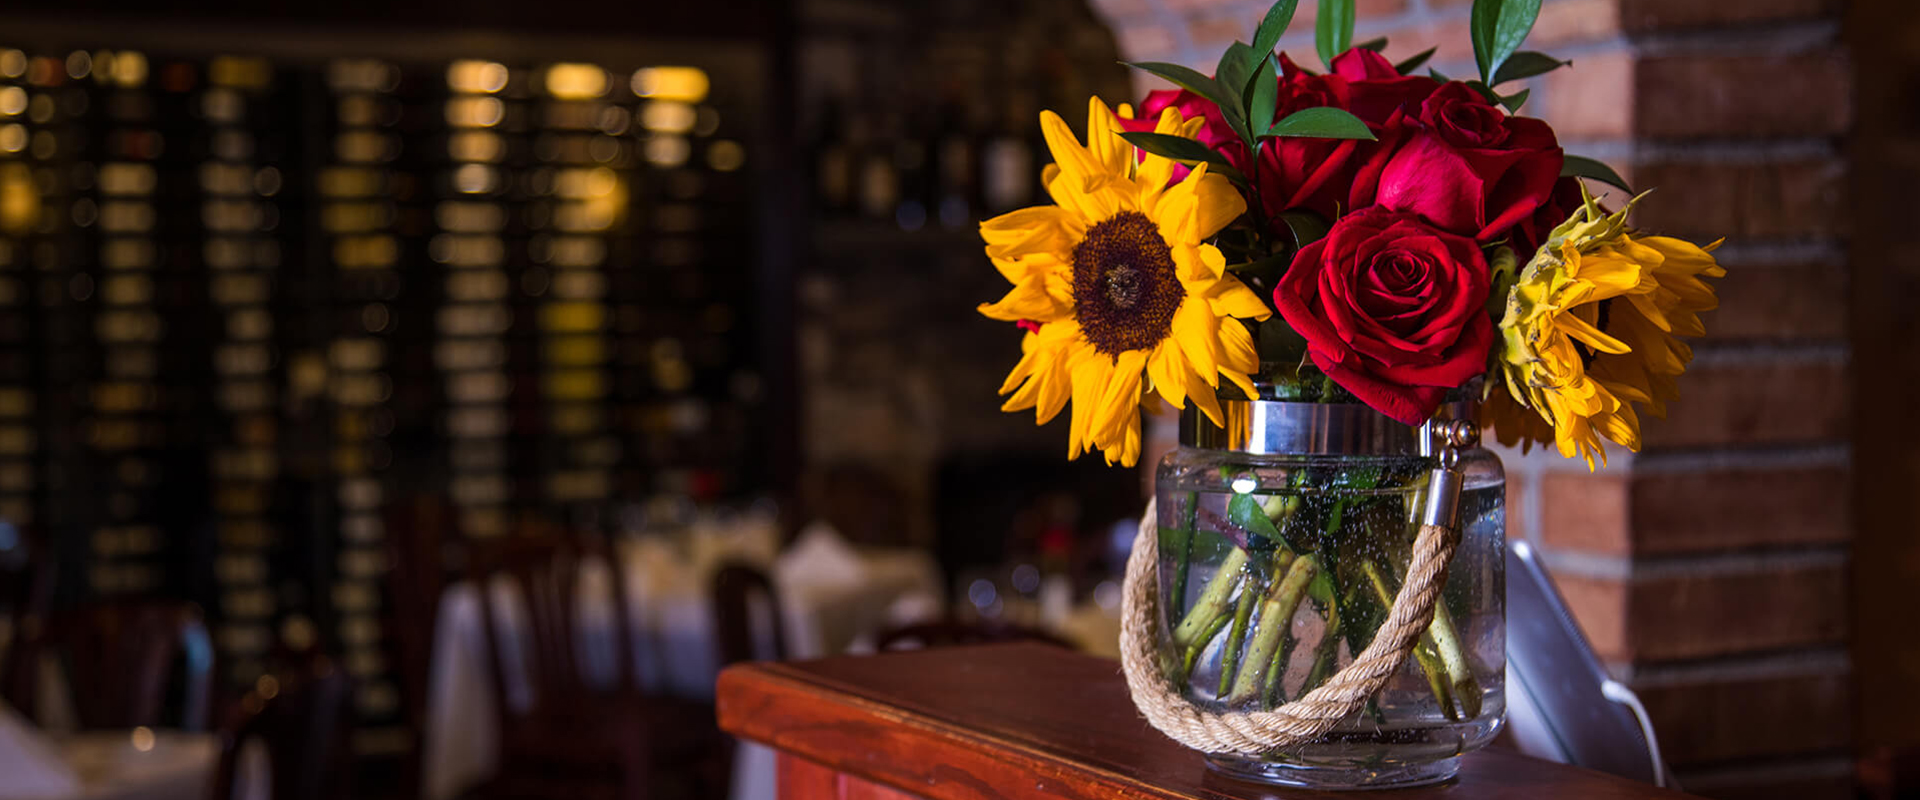 roses and sunflowers in a glass with wine racks in background